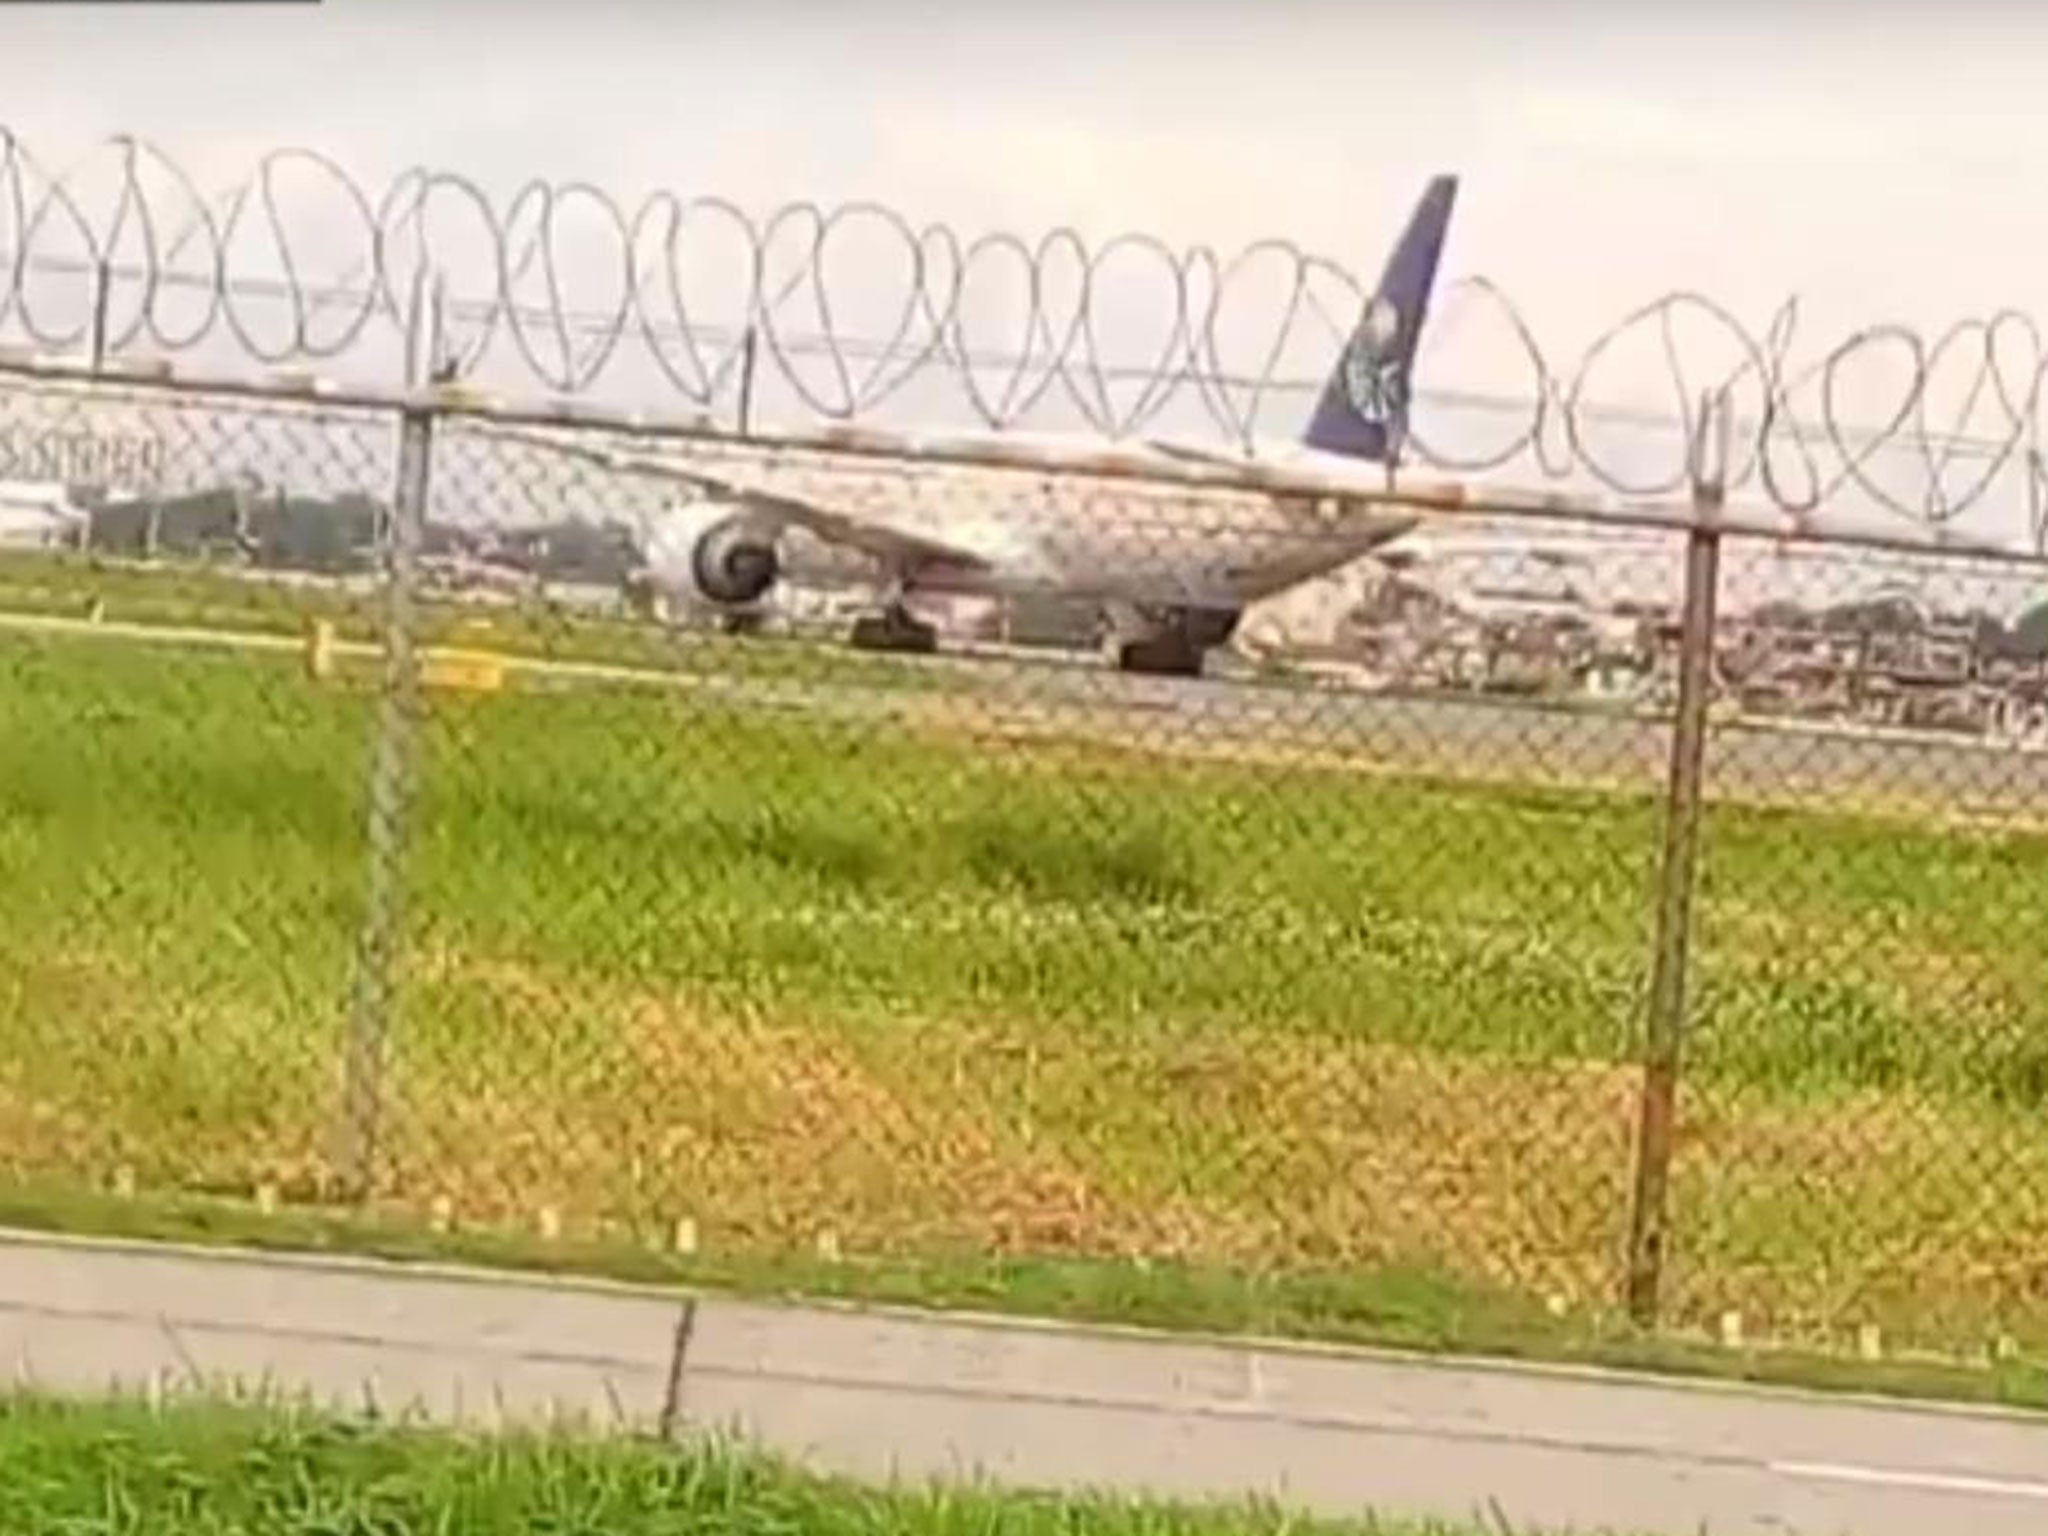 The flight from Jeddah to Manila was isolated after a threat was reported on board (Sky News)